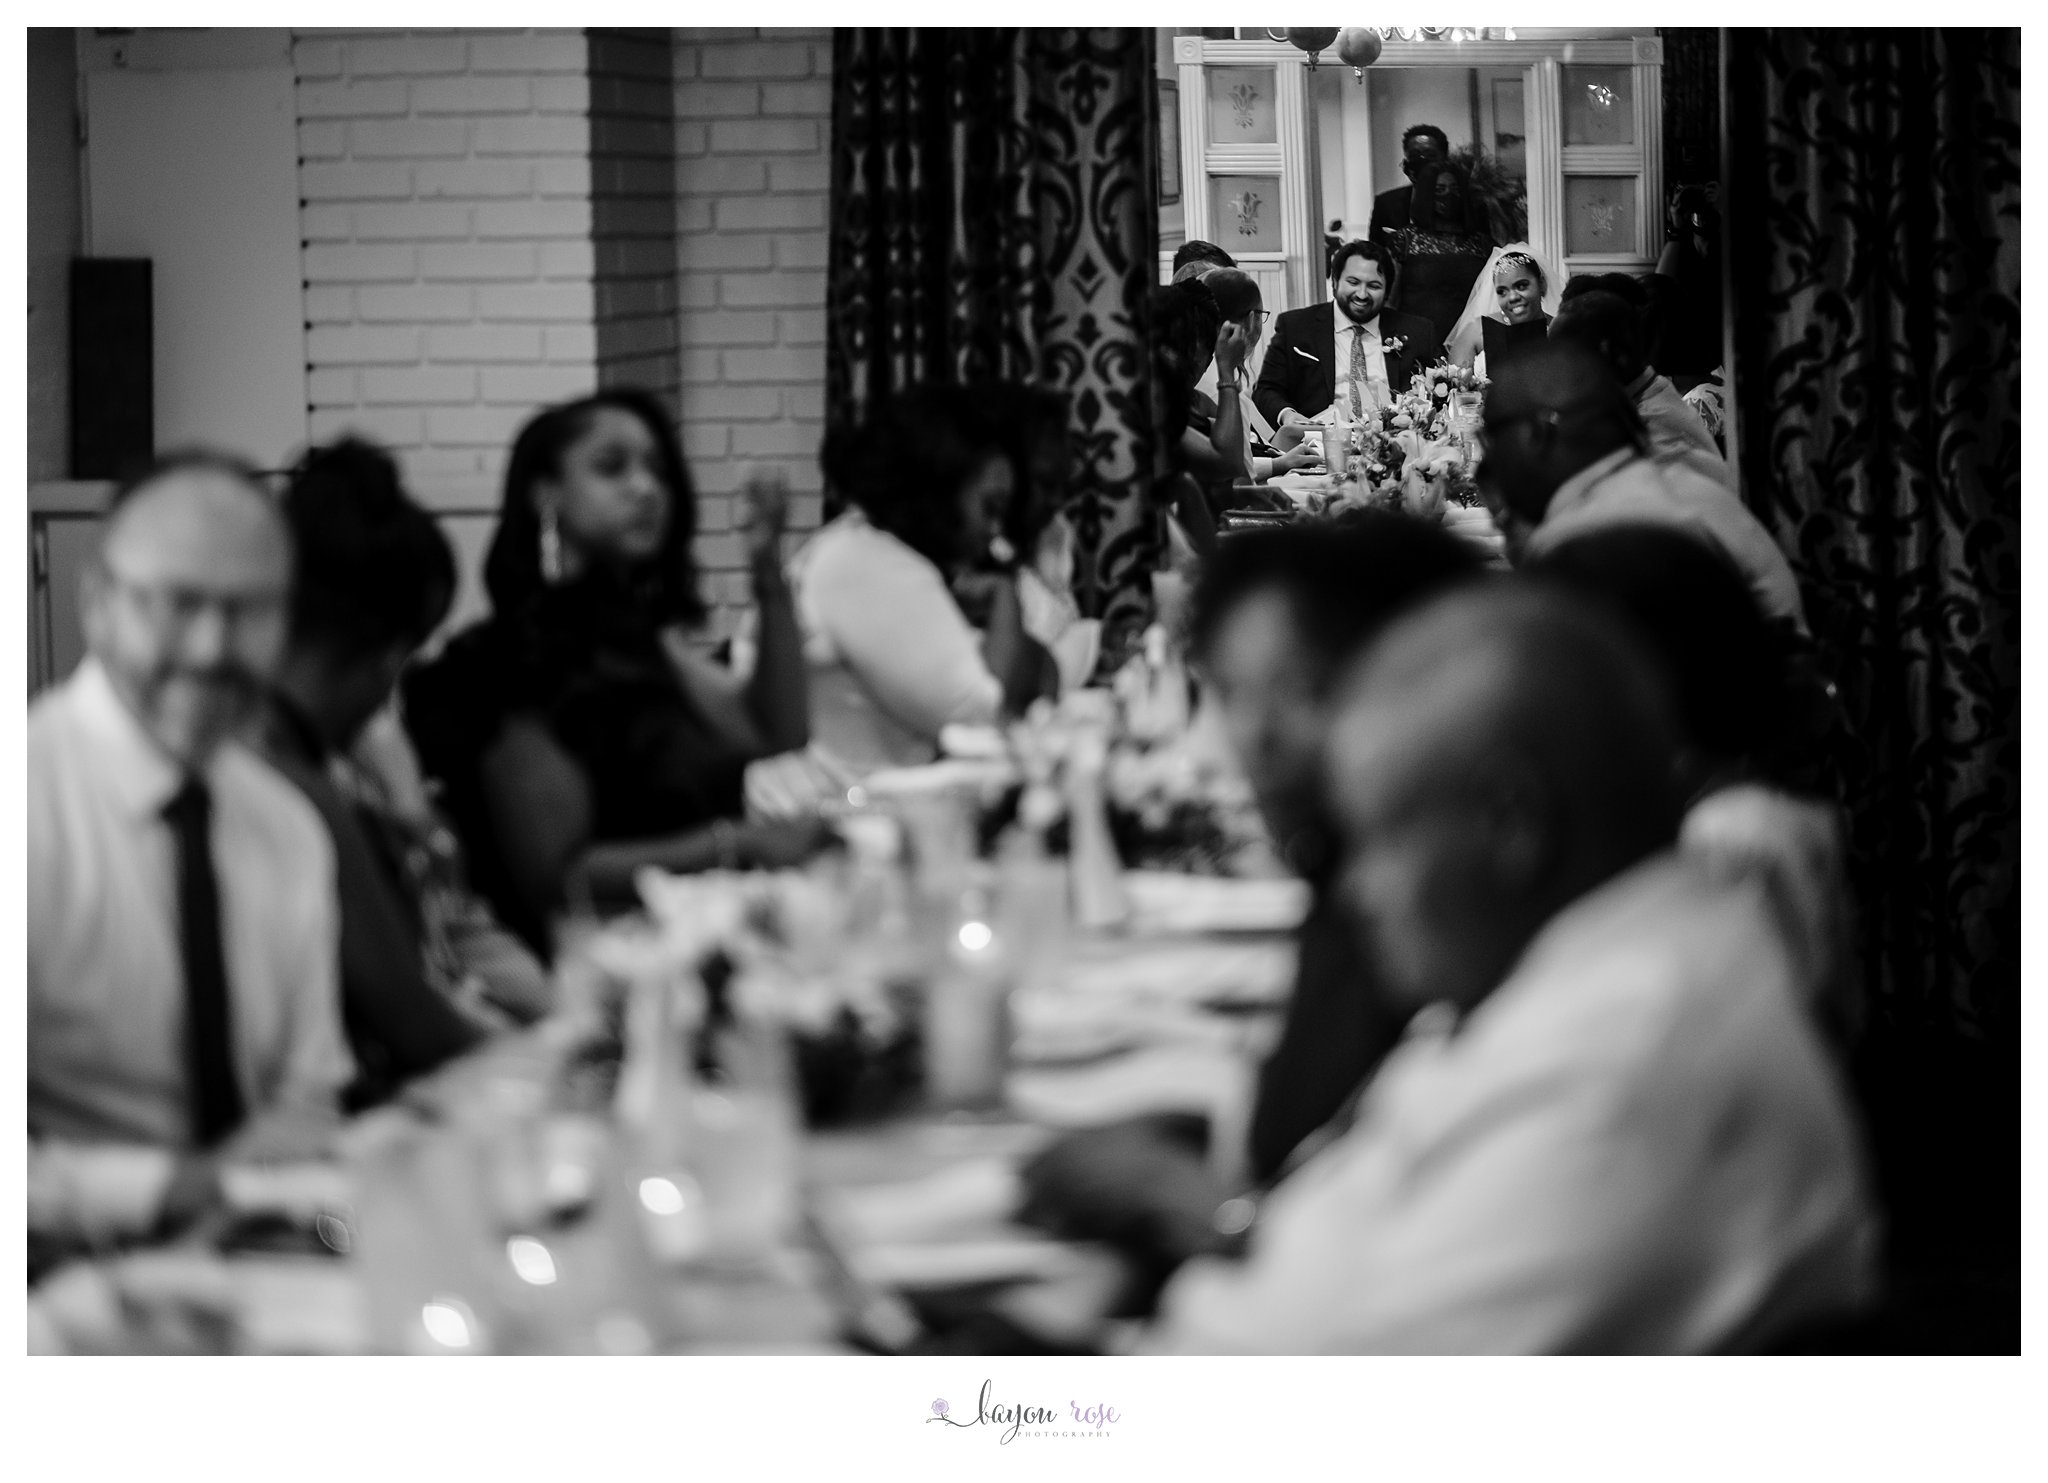 image of table filled with people at wedding reception in restaurant